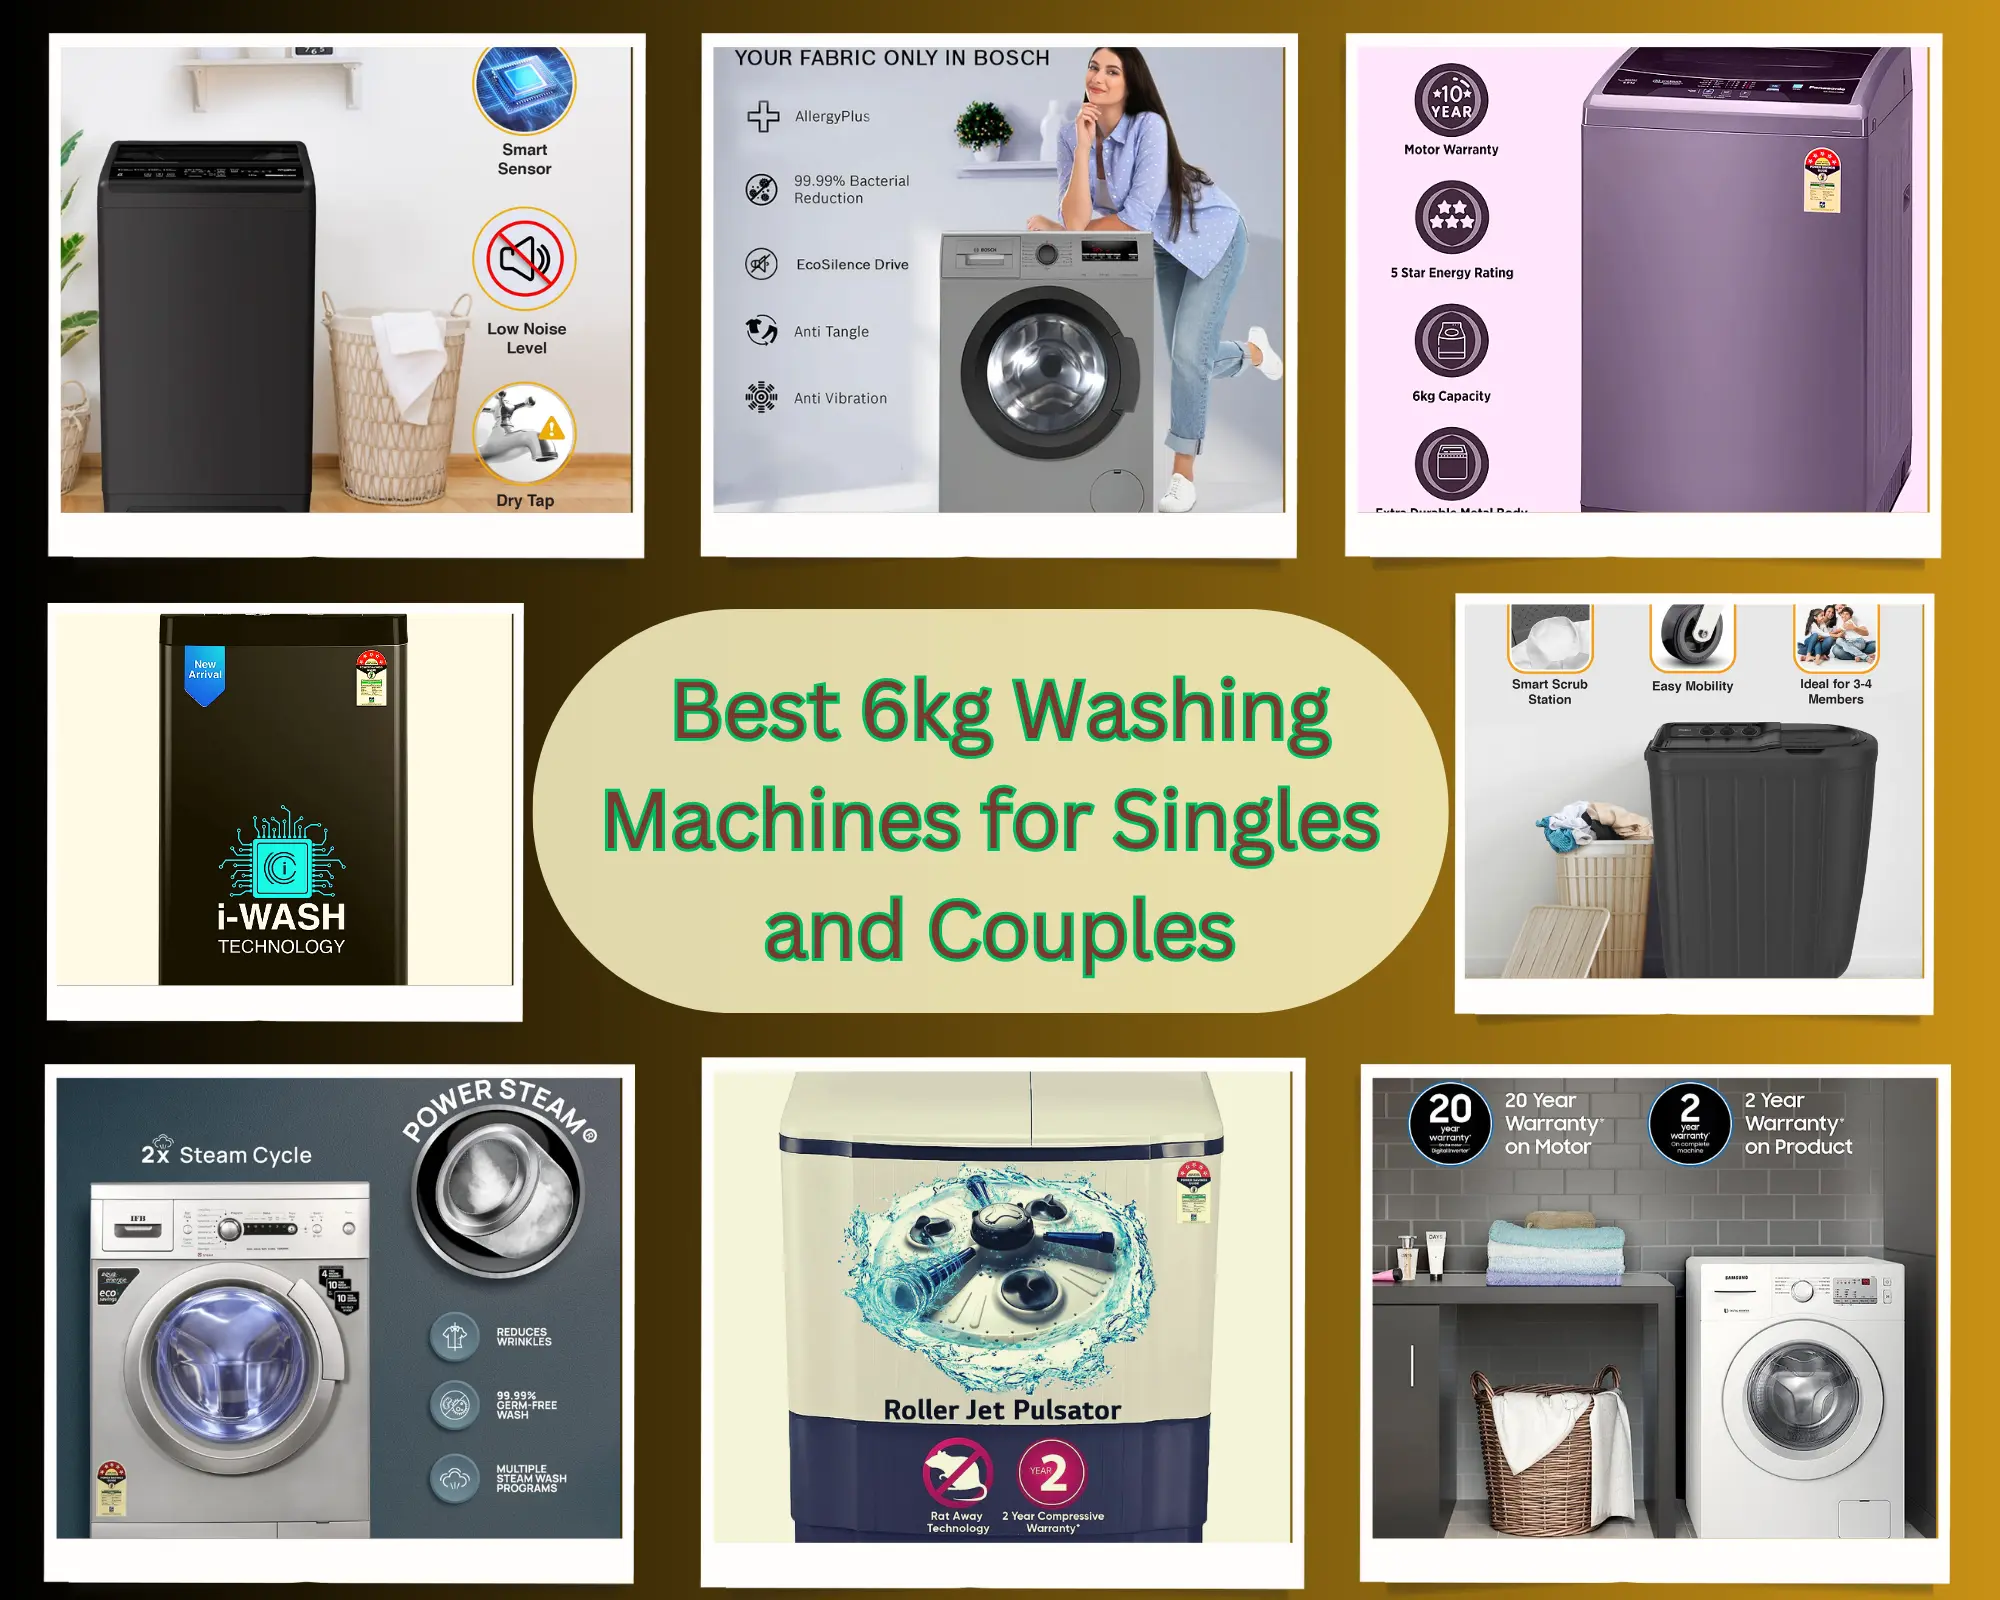 Best 6kg Small Washing Machines for Singles and Couples